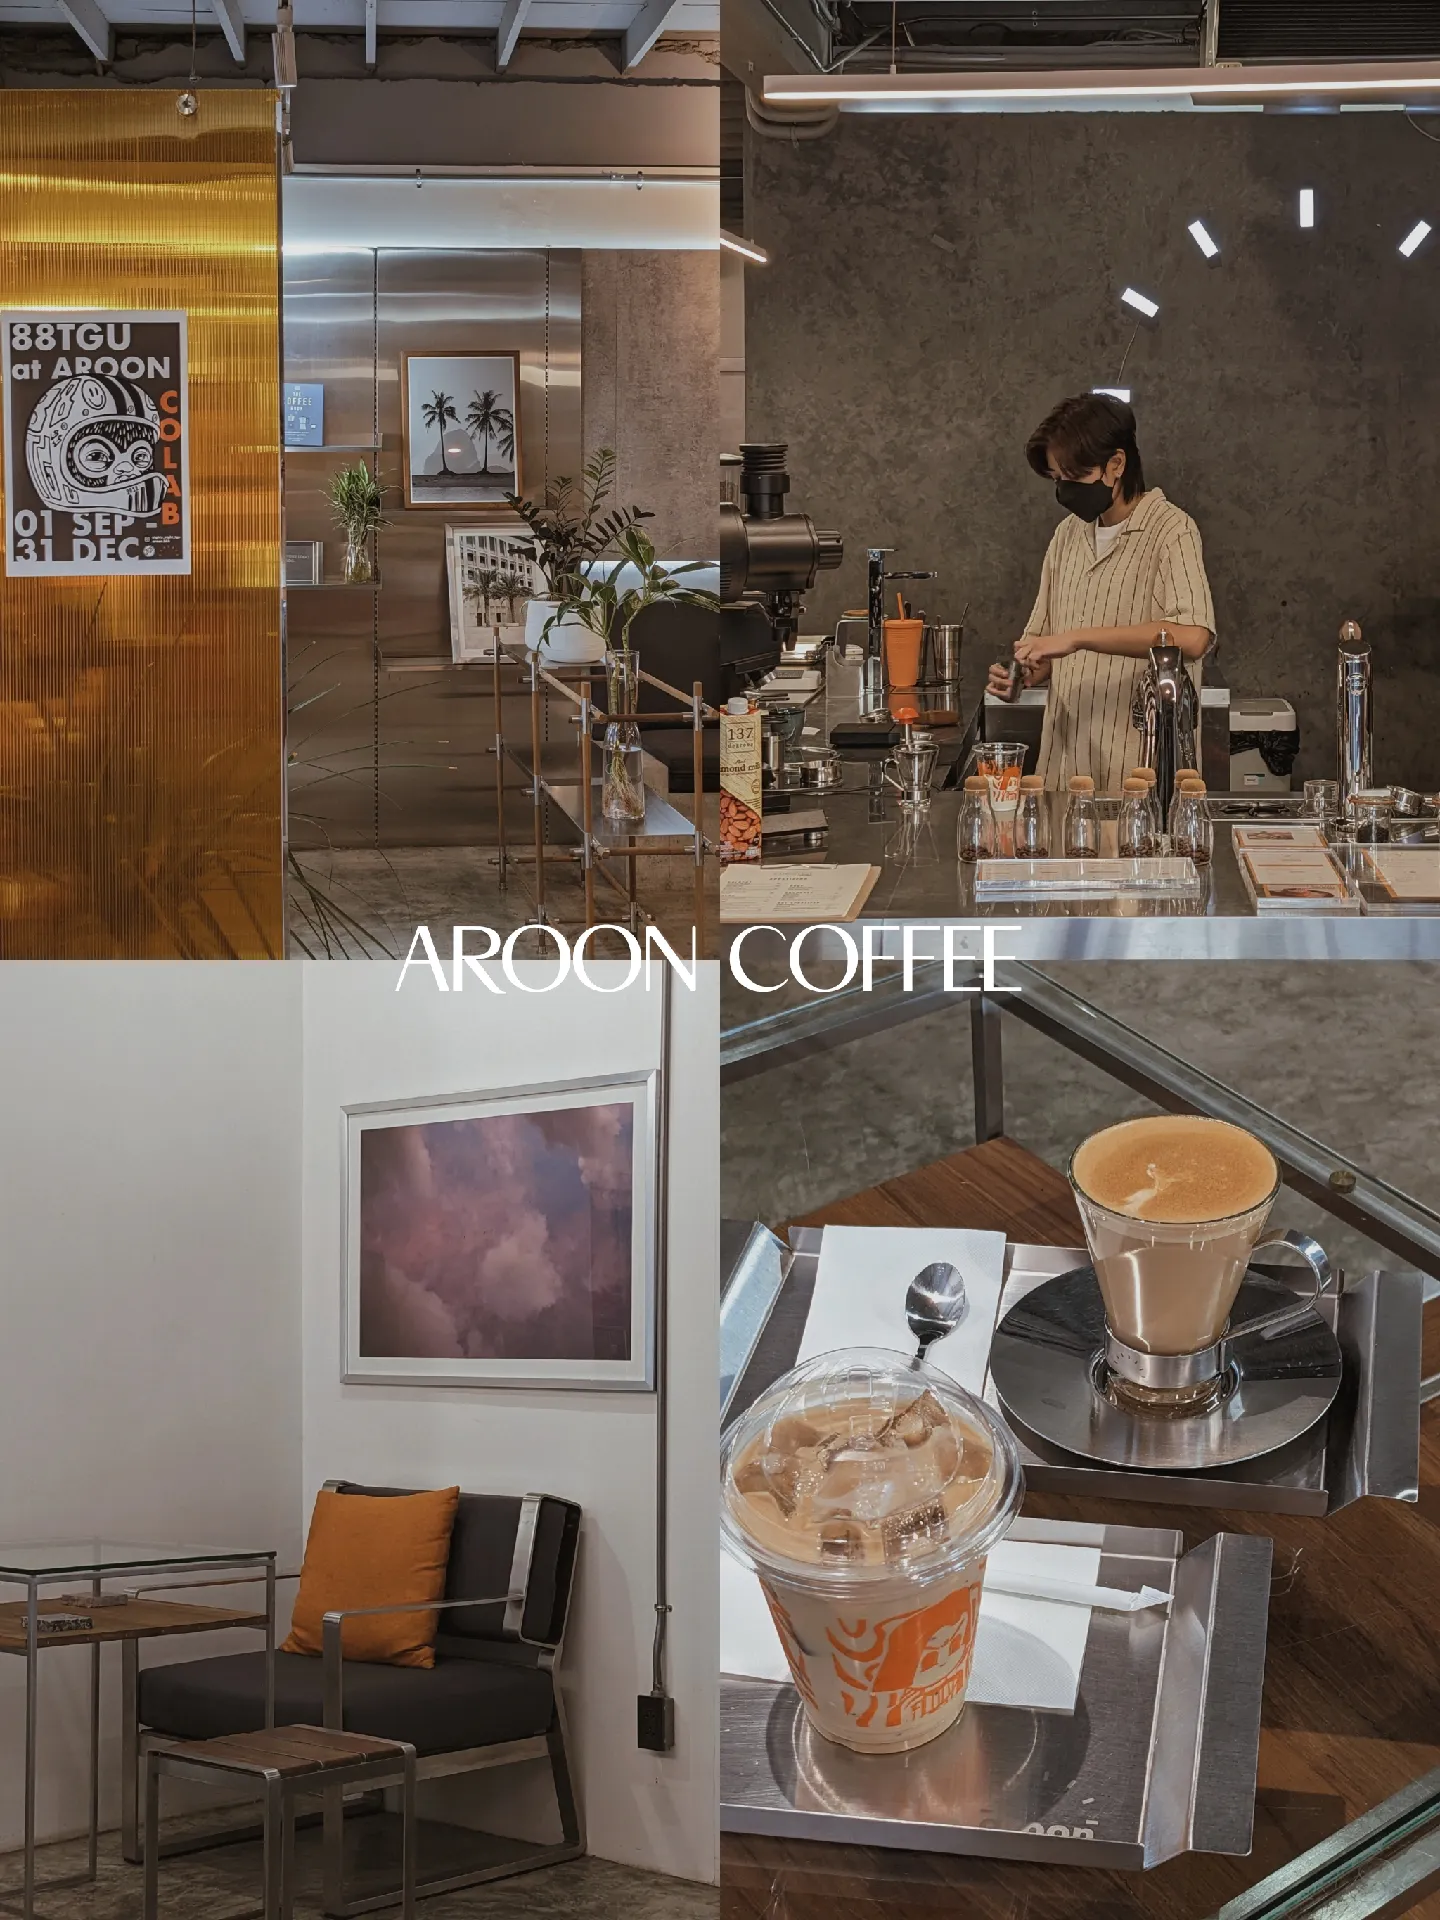 rating all the cafes i tried in bangkok ☕🇹🇭's images(7)